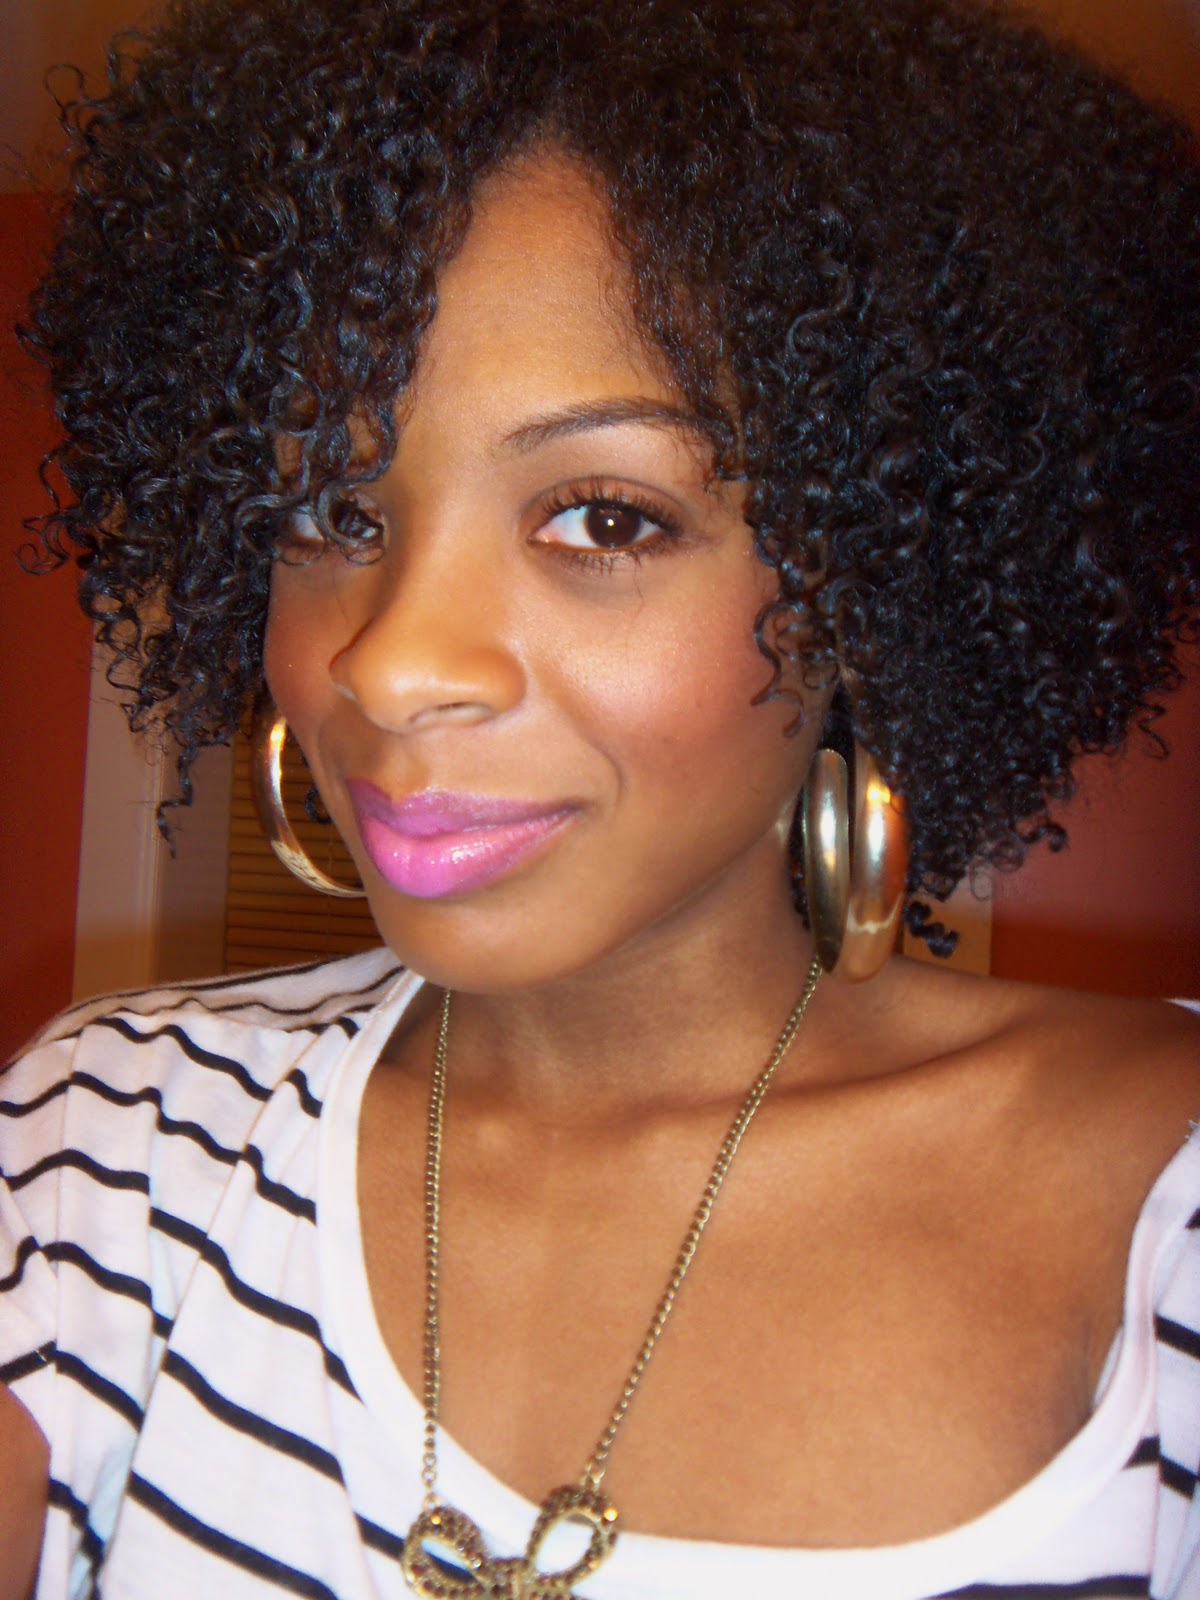 Bad Hair Day: Kinky Curly Products- Wash and go + Fotd!